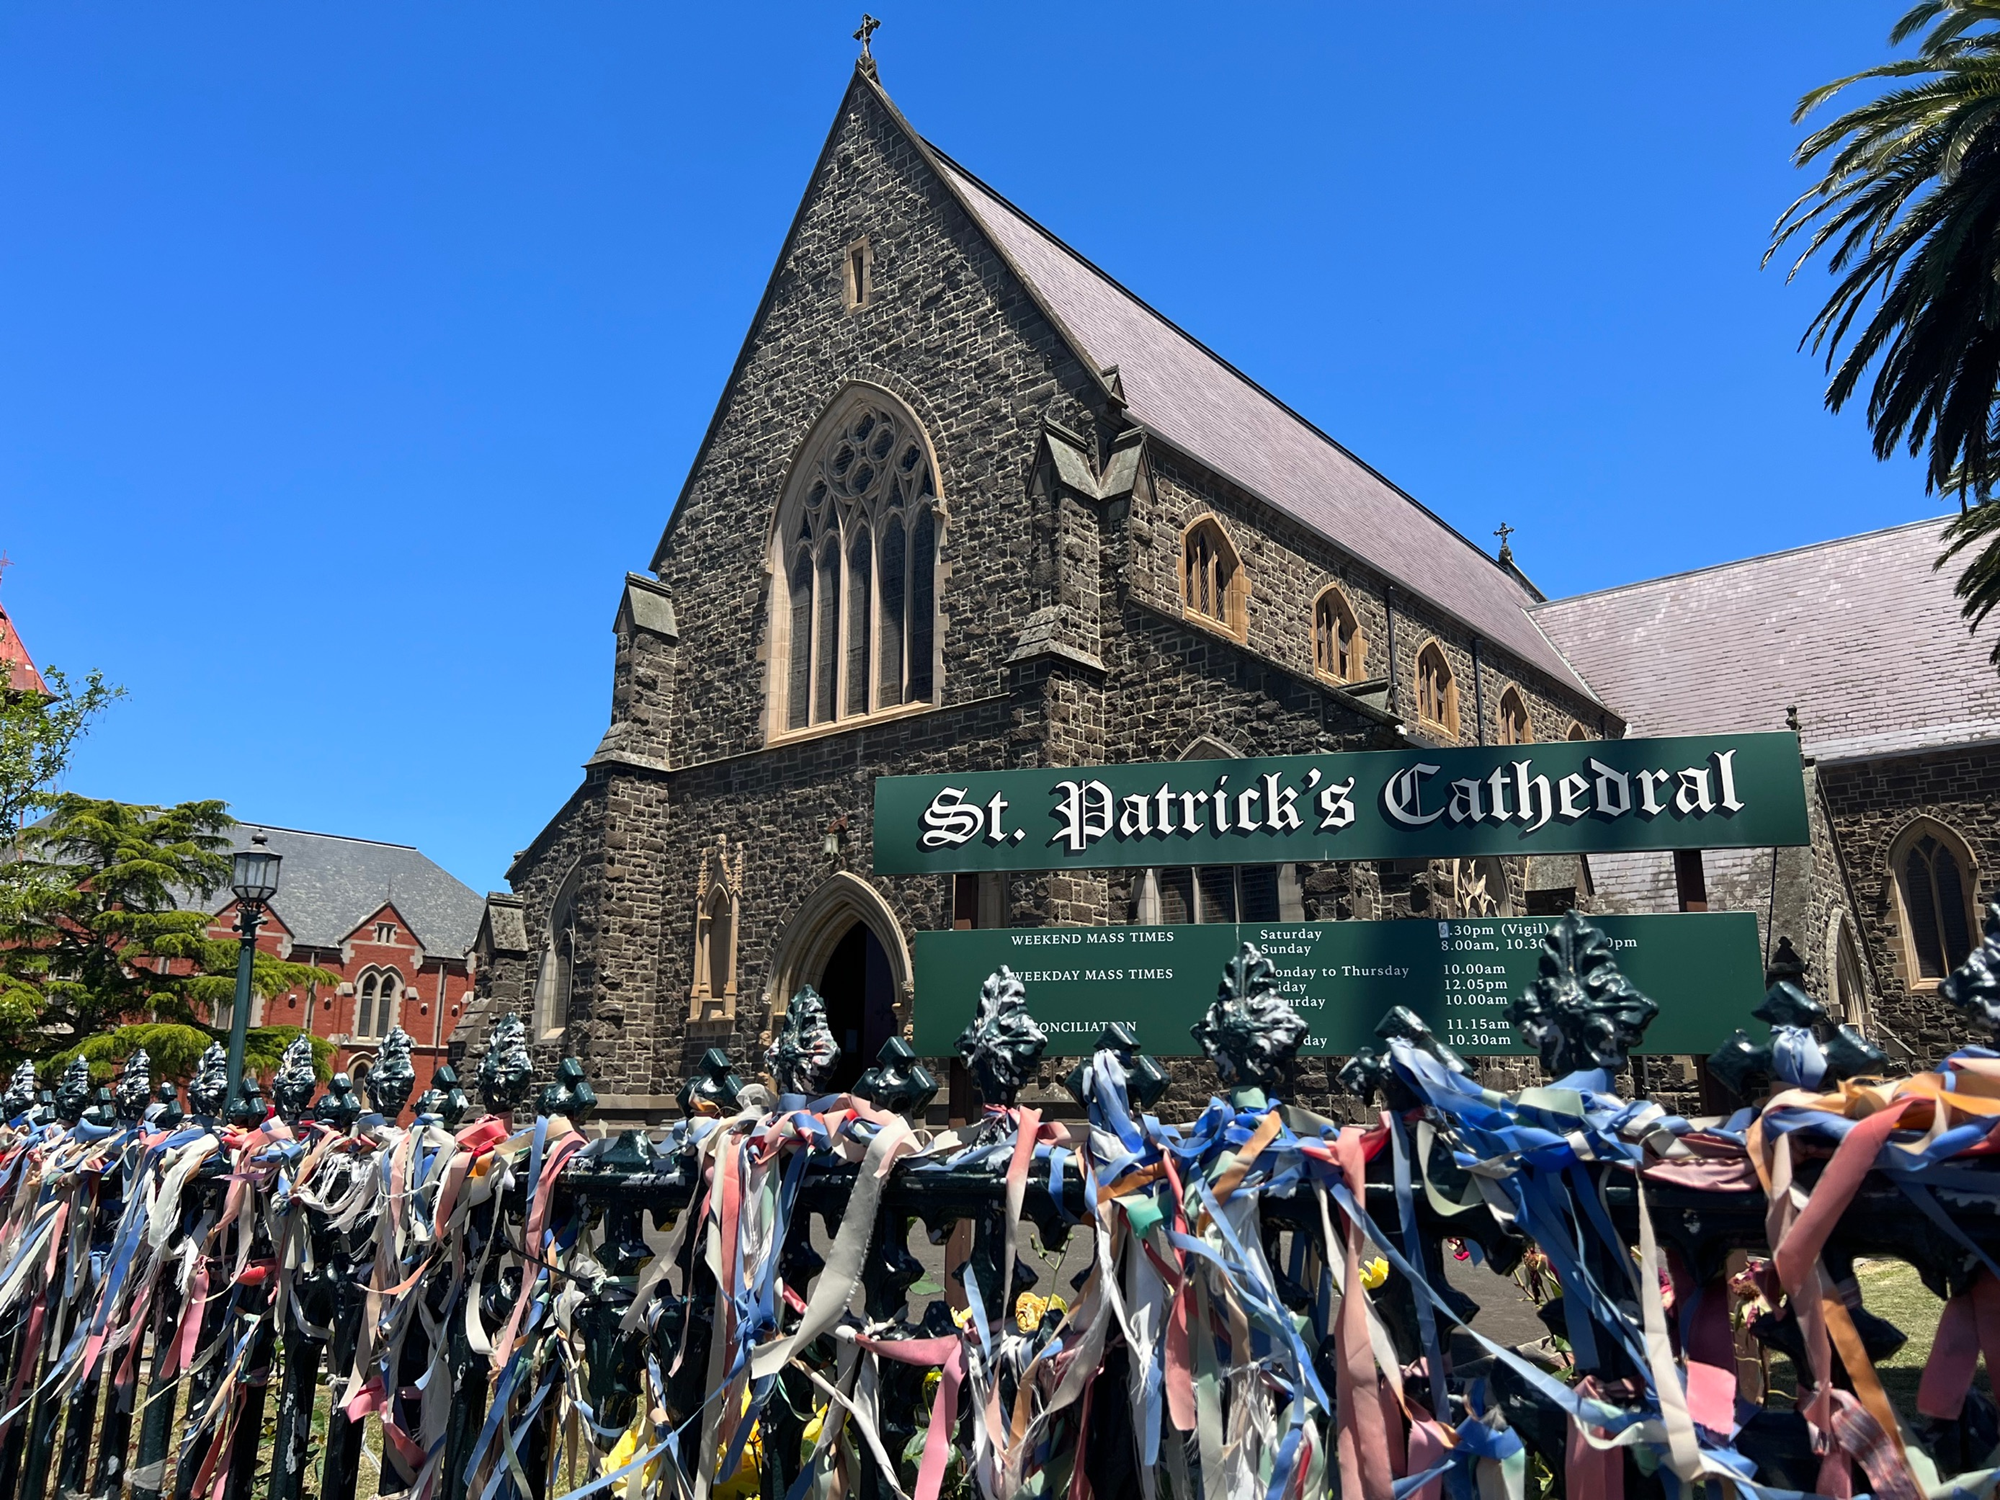 Ribbons tied on the fence of St Patrick's Cathedral in Ballarat